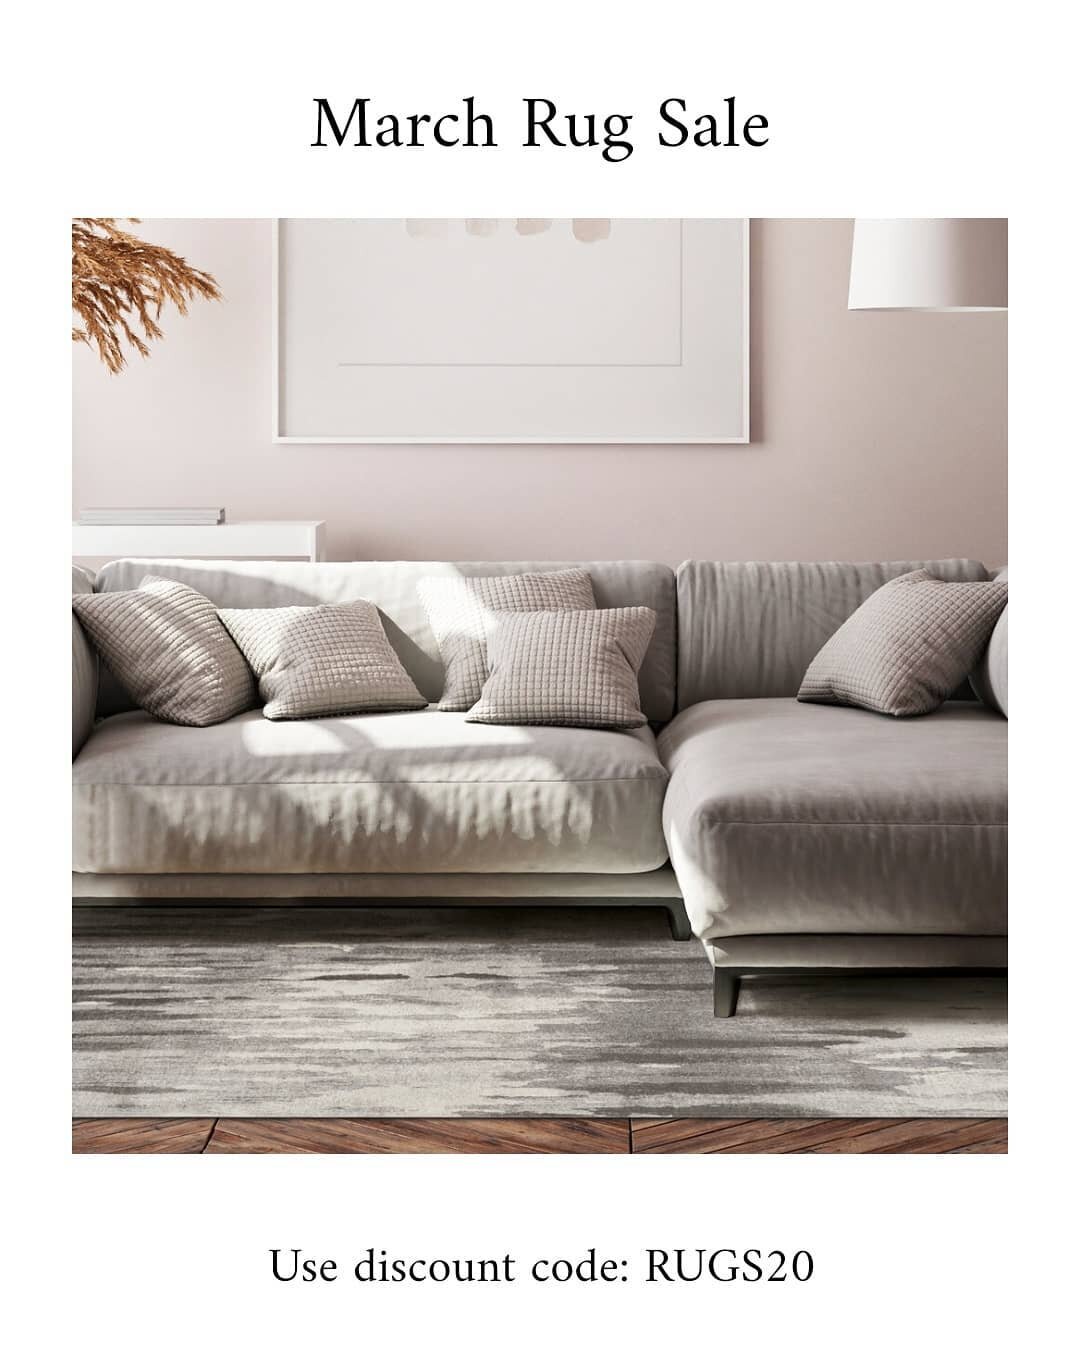 ☀️MARCH RUG SALE☀️

With the days getting longer and brighter, we wanted to give our customers another reason to smile with our new March offer.

Get 20% off our new rugs collection exclusively for the month of March.

Use promo code RUGS20 at checko